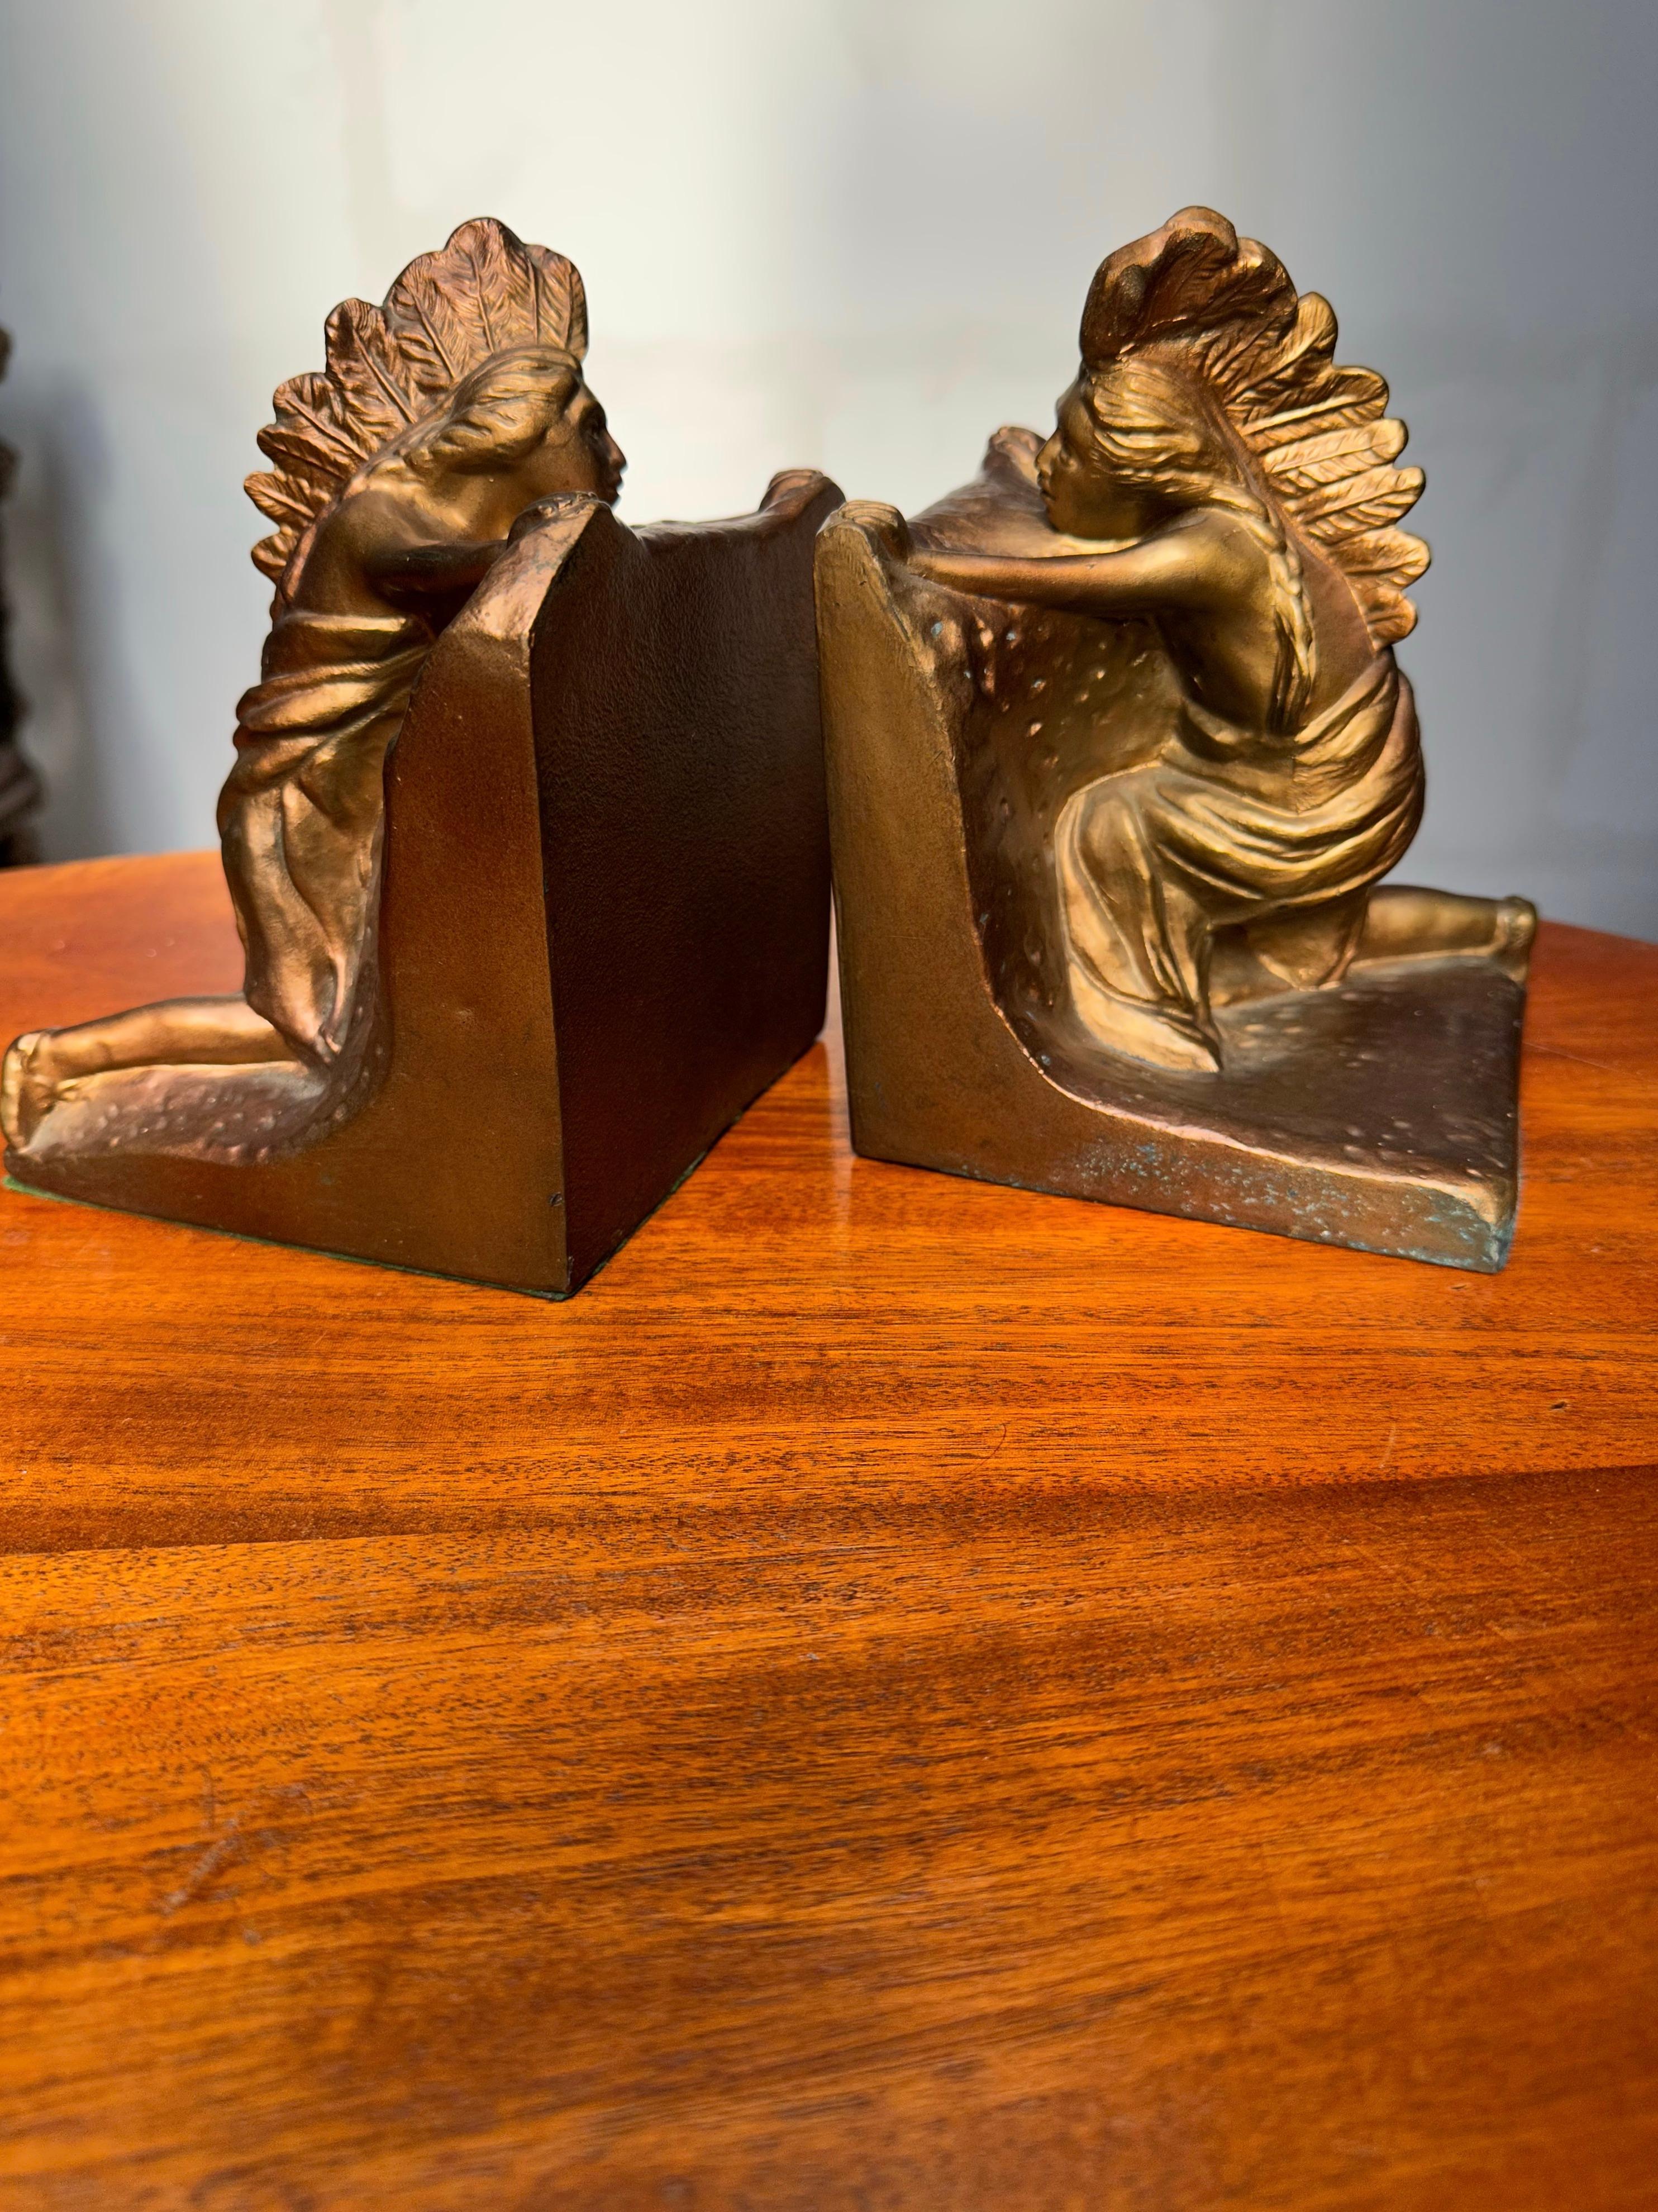 Rare pair of original, American made, Marked, Native American / Indian bookends.

In the earliest years of the 1900s a lady artisan working out of New York created these now very rare Americana. Little else is known about this artist and her work